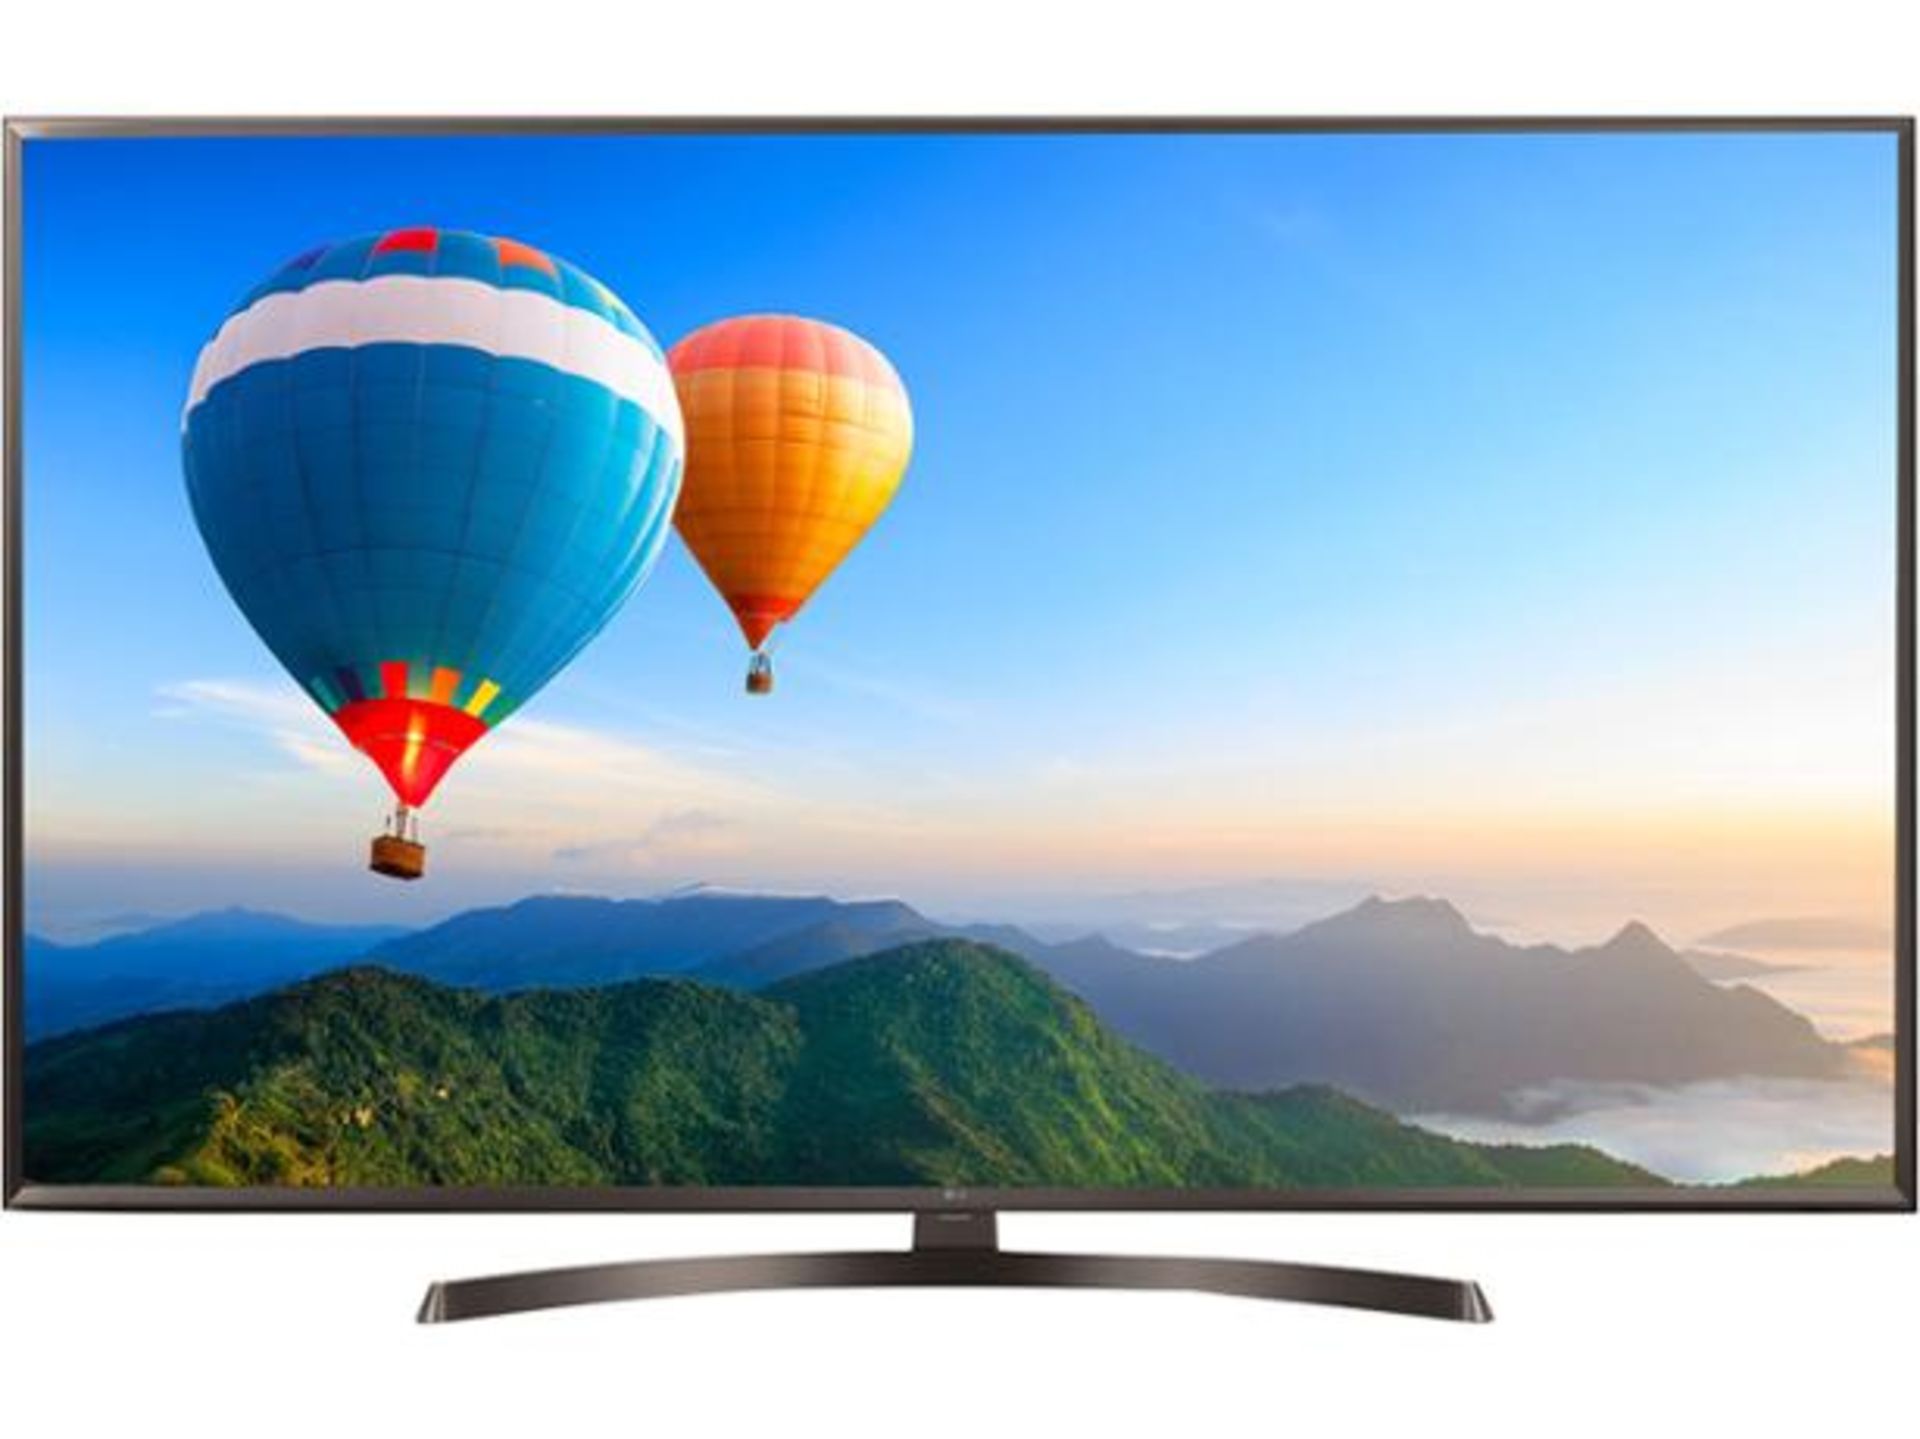 V Grade A LG 65 Inch ACTIVE HDR 4K ULTRA HD LED SMART TV WITH FREEVIEW HD & WEBOS & WIFI - AI TV